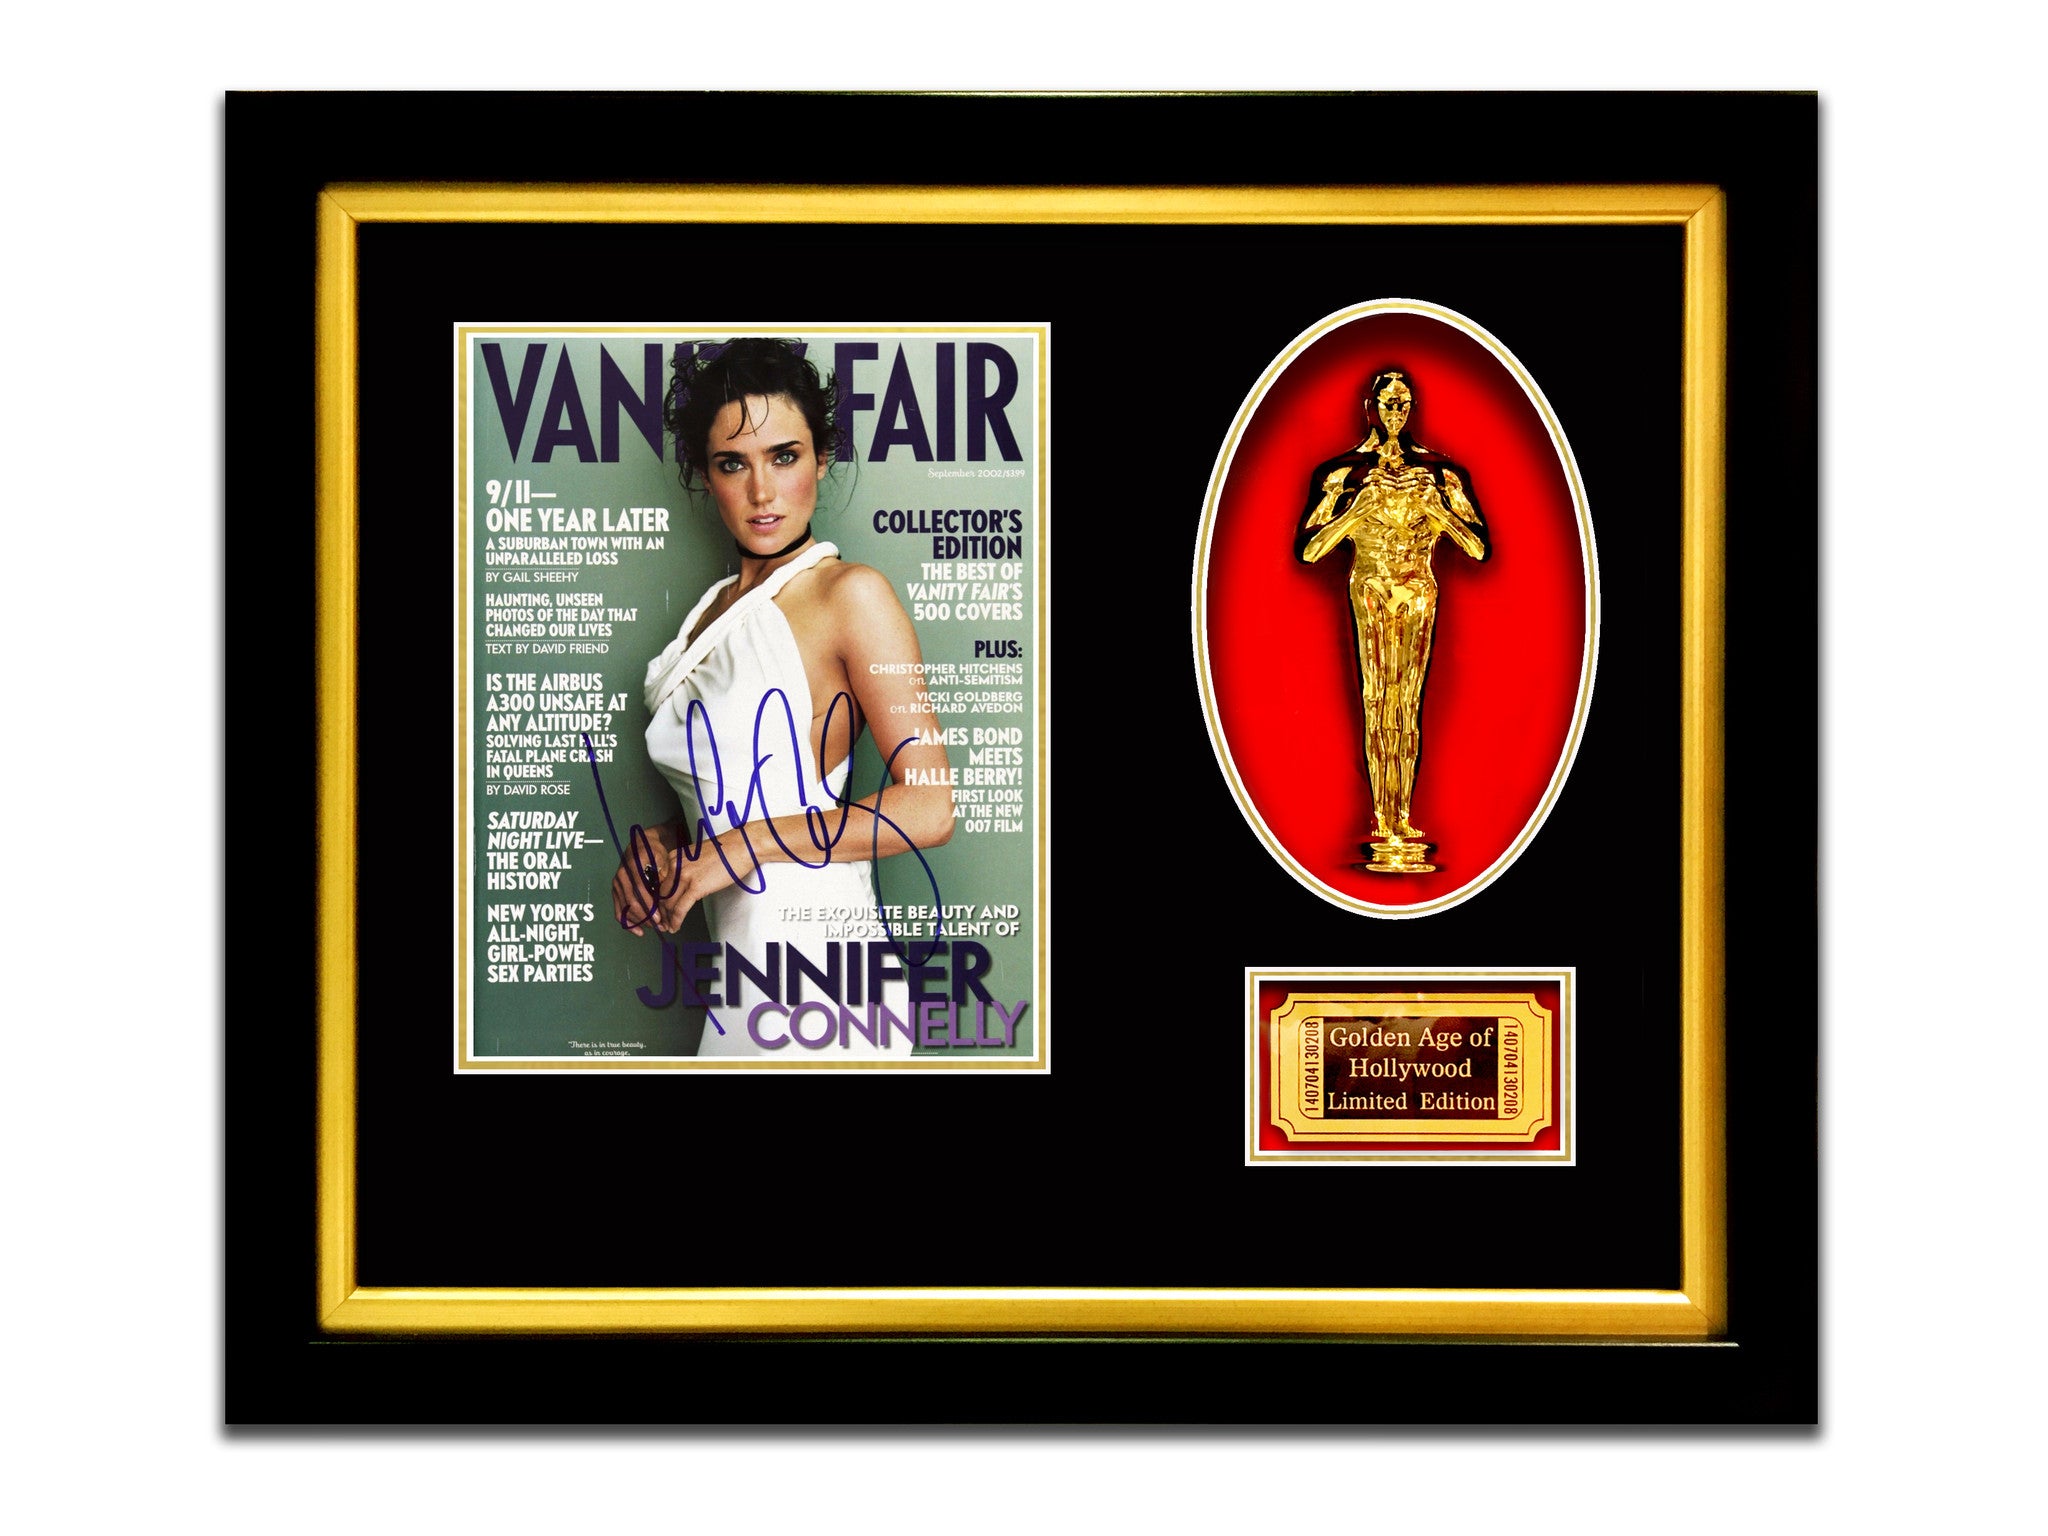 VANITY FAIR 2002 COLLECTOR'S EDITION - JENNIFER CONNELLY by VANITY